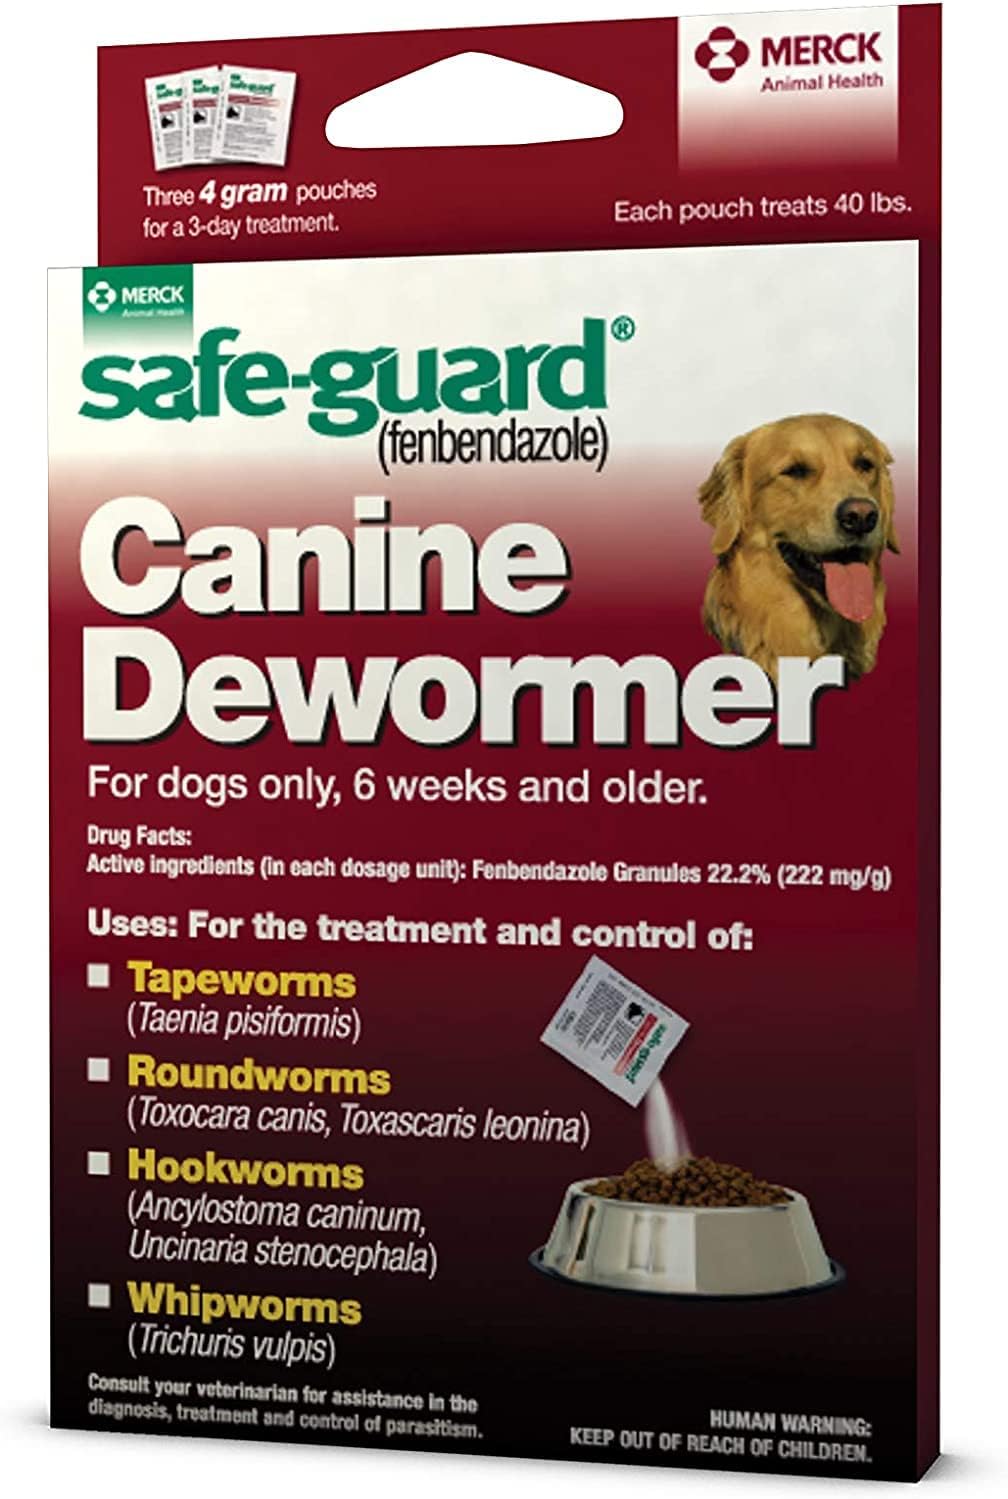 Dog Dewormer Canine 8in1 Safe Guard Safeguard Dogs Large Puppies Pet Wormer 4gr : Pet Supplies